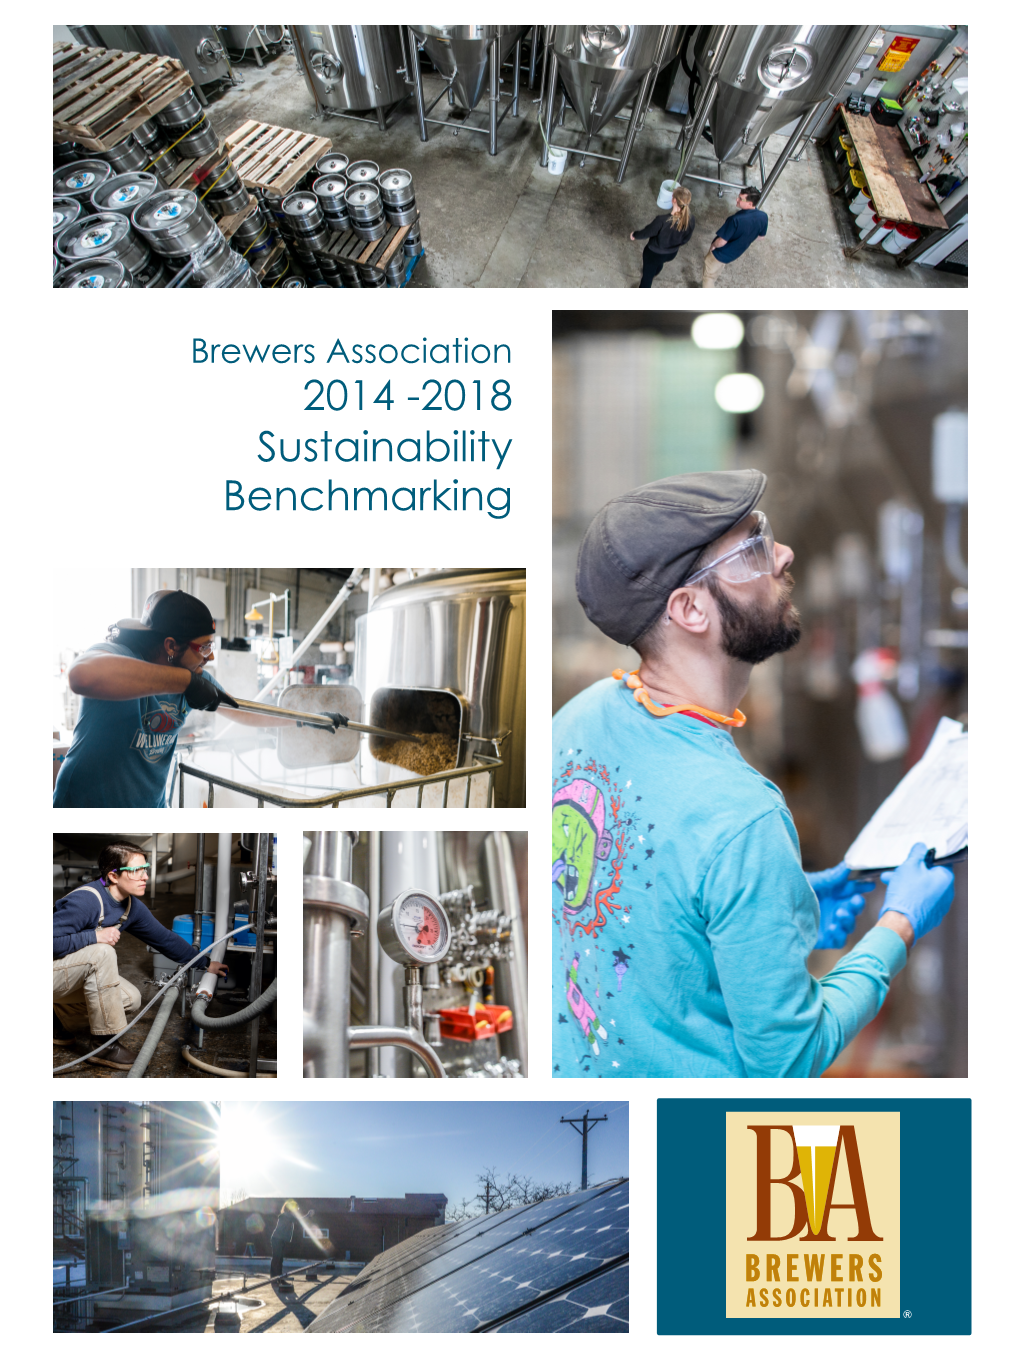 Brewers Association 2014 -2018 Sustainability Benchmarking Acknowledgements